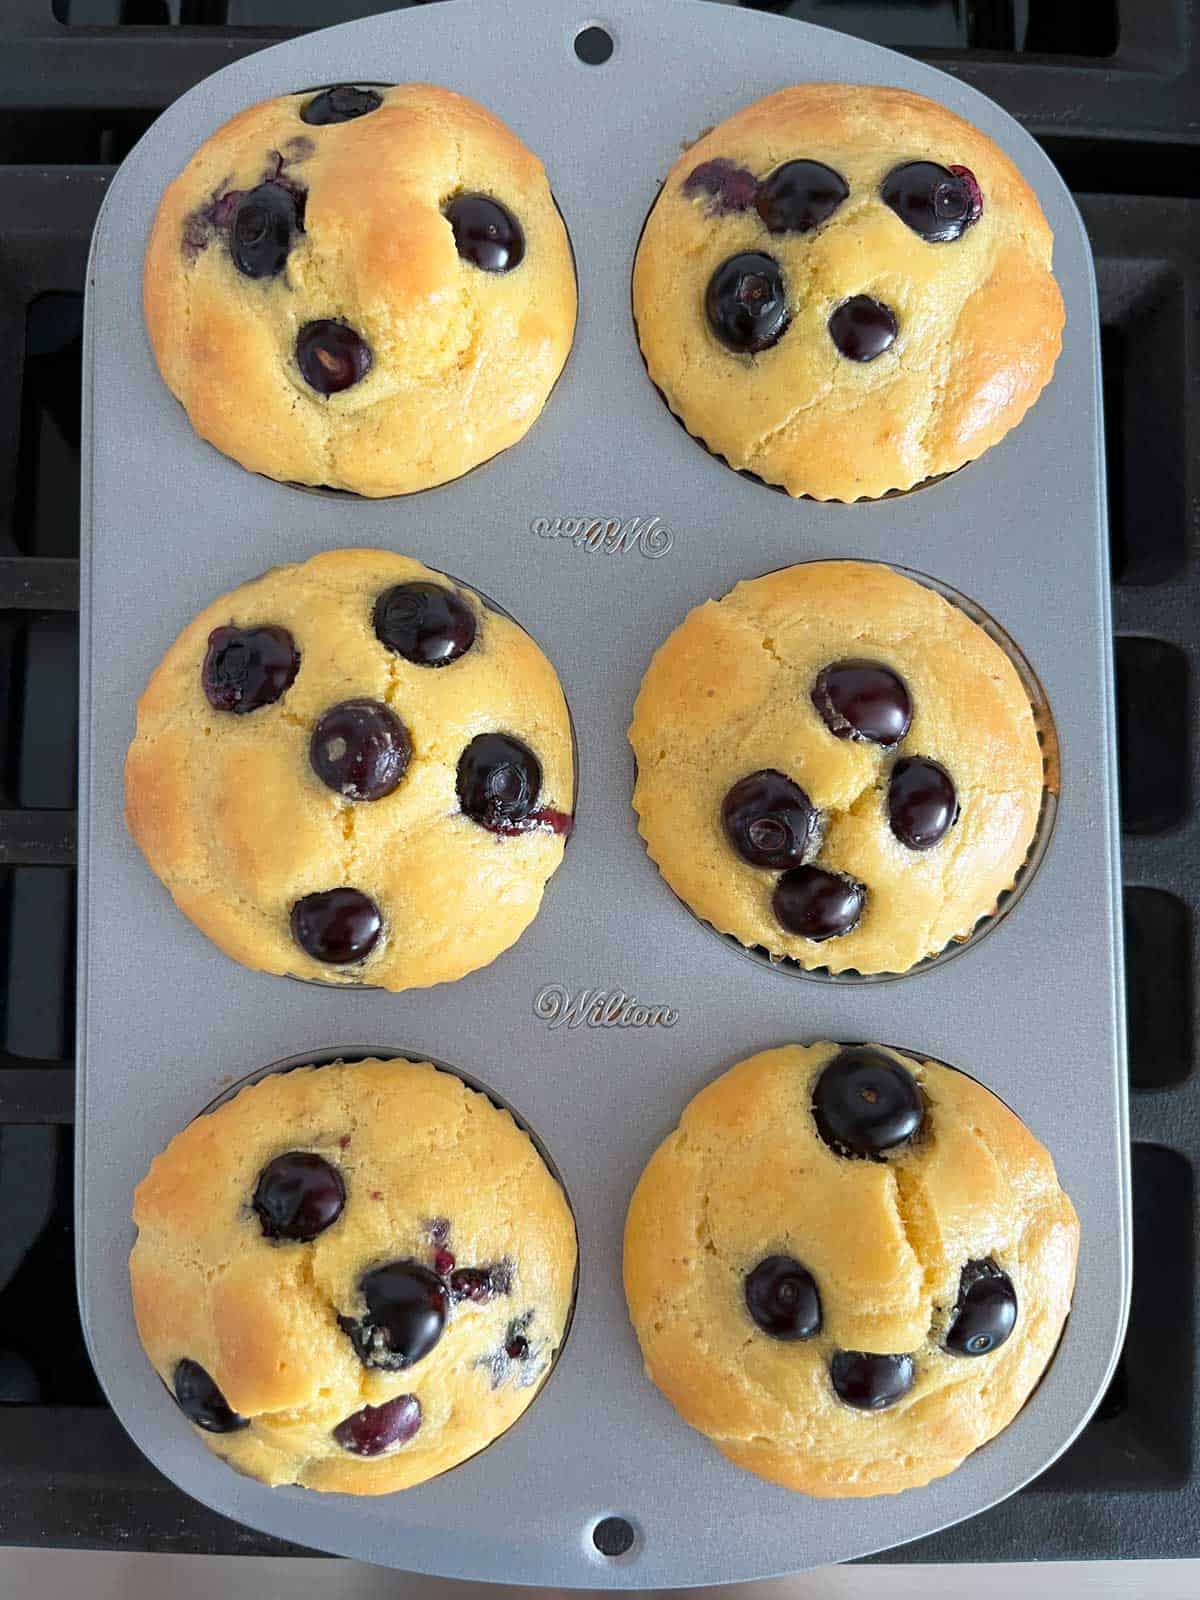 The muffins are ready in the pan.